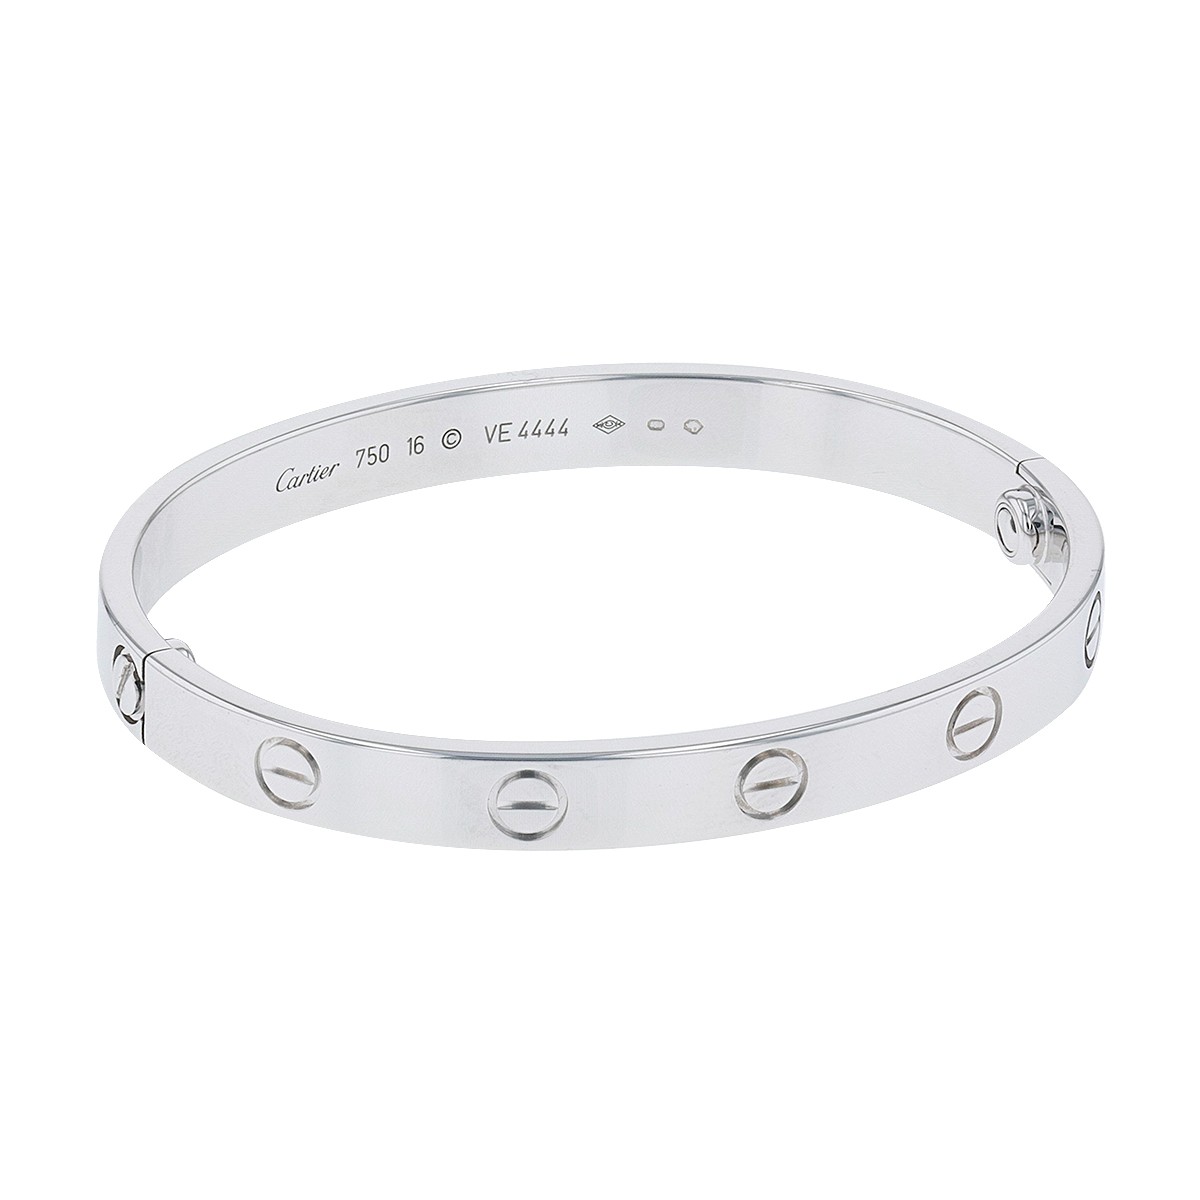 Cartier Pasha stainless steel bracelet 21mm x 18mm | Gray & Sons